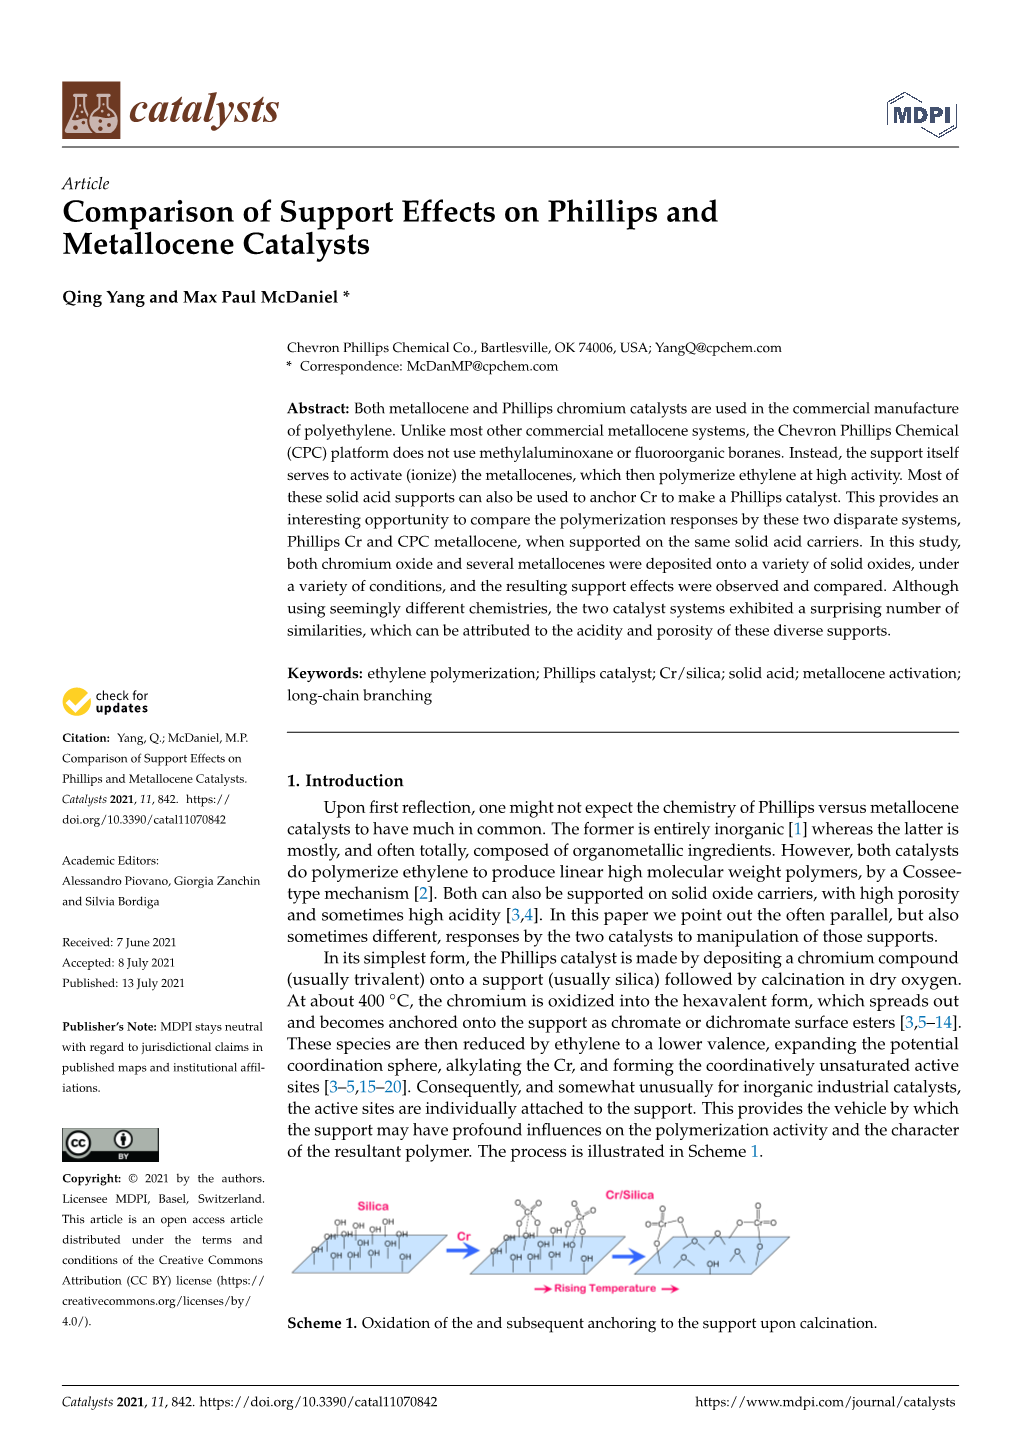 Comparison of Support Effects on Phillips and Metallocene Catalysts